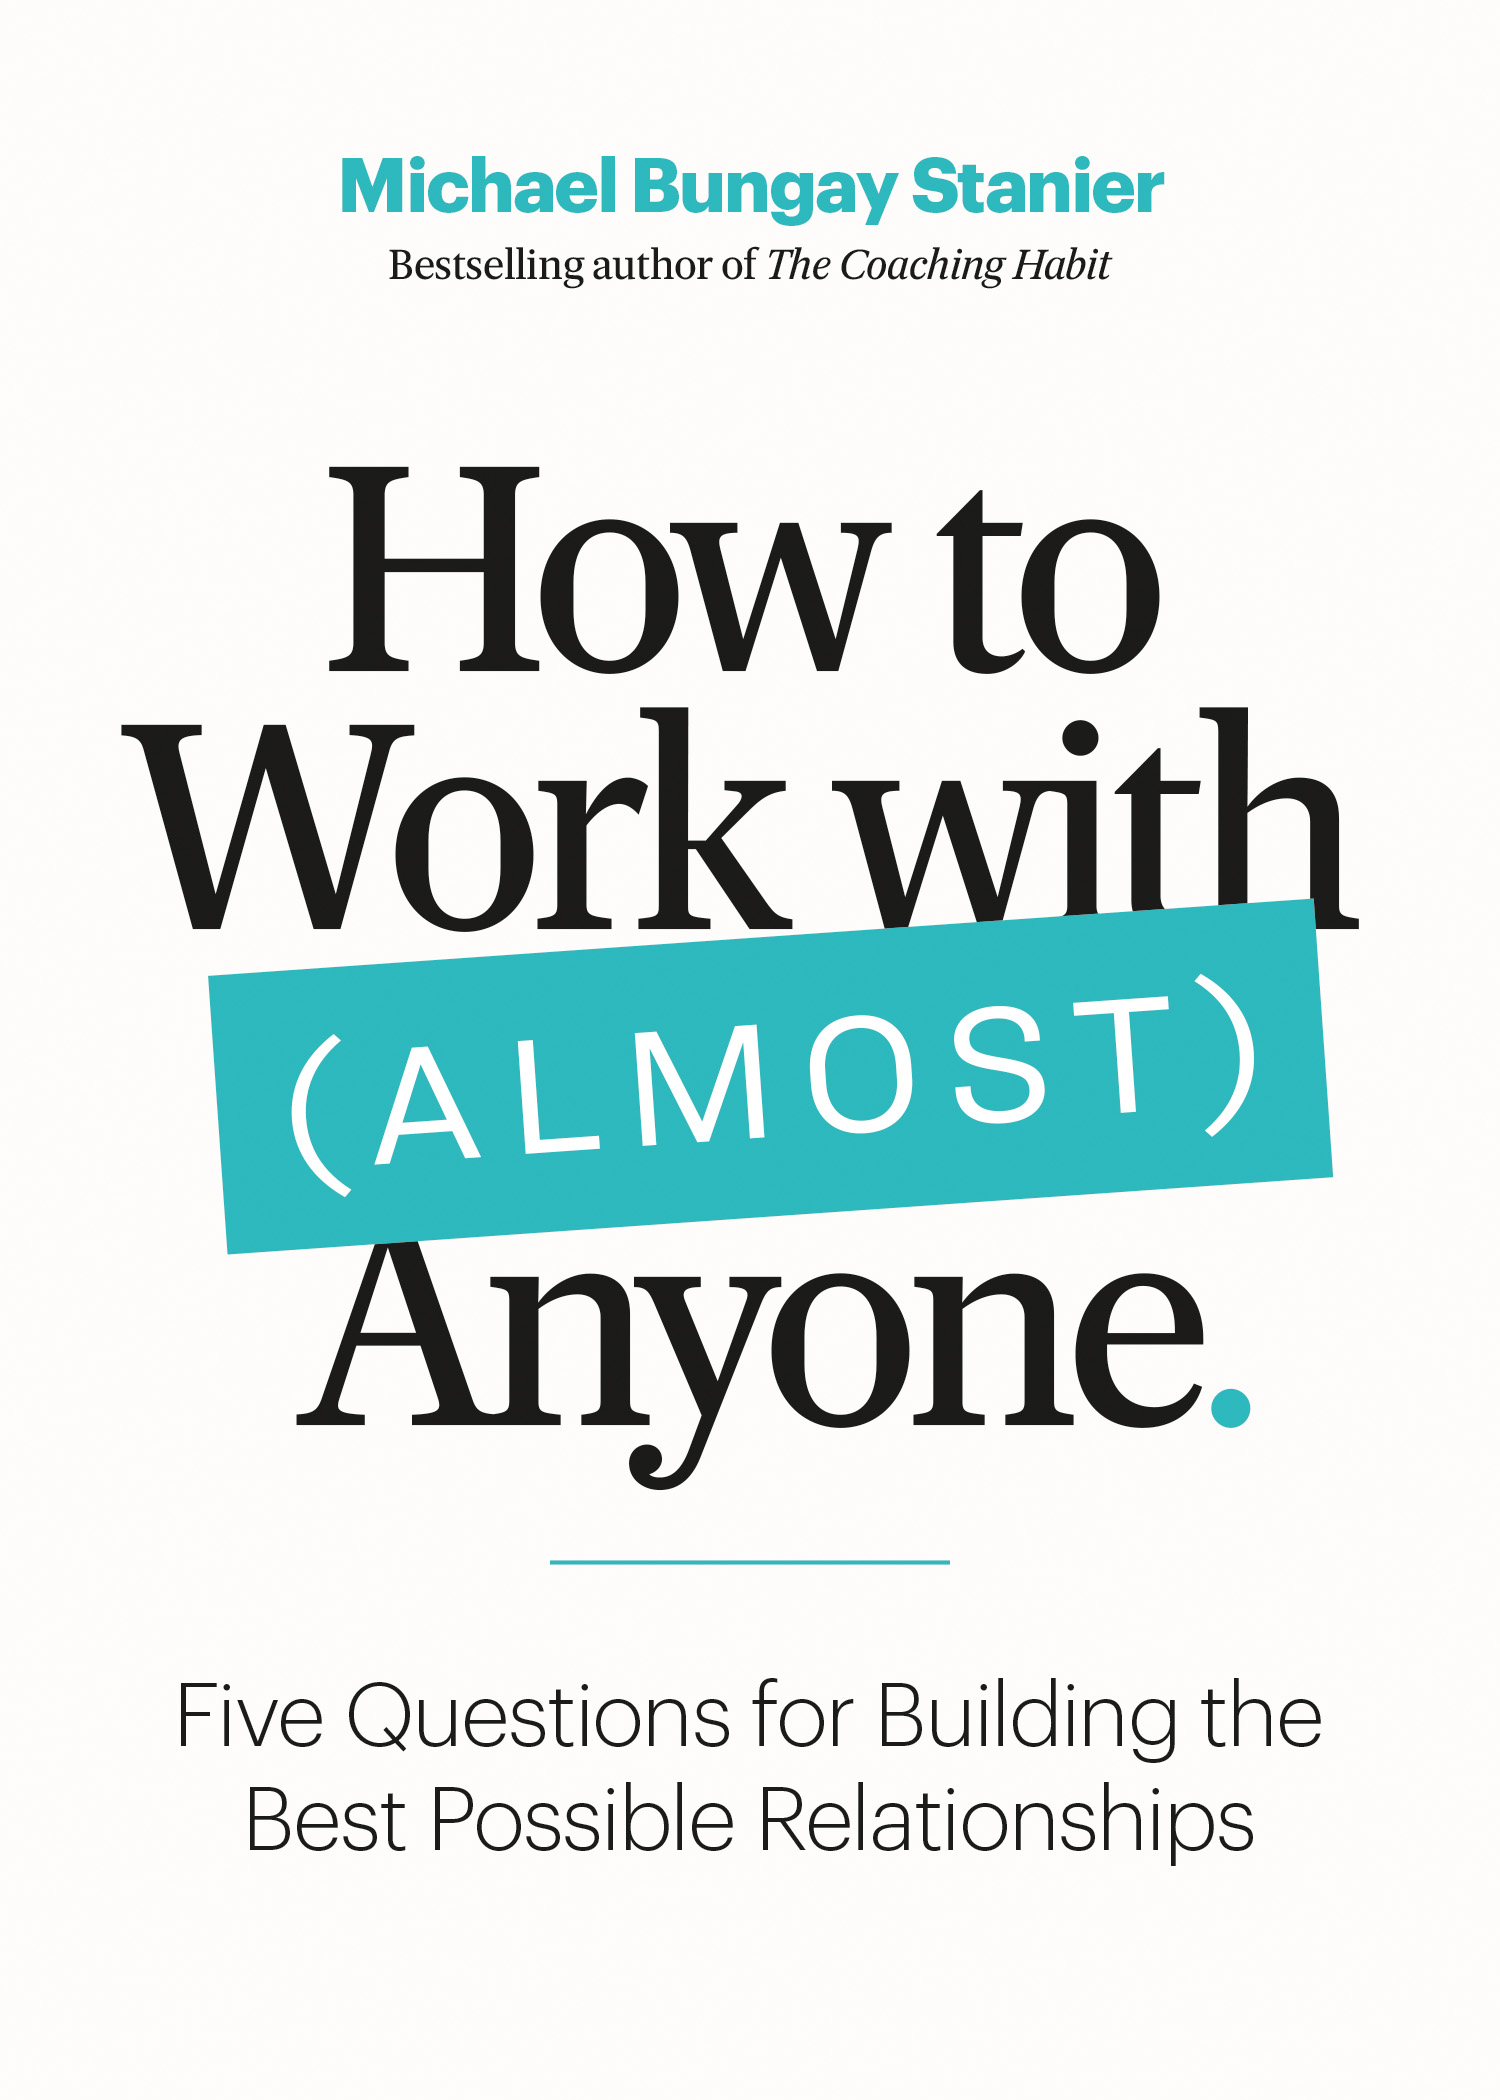 How to Work with (Almost) Anyone